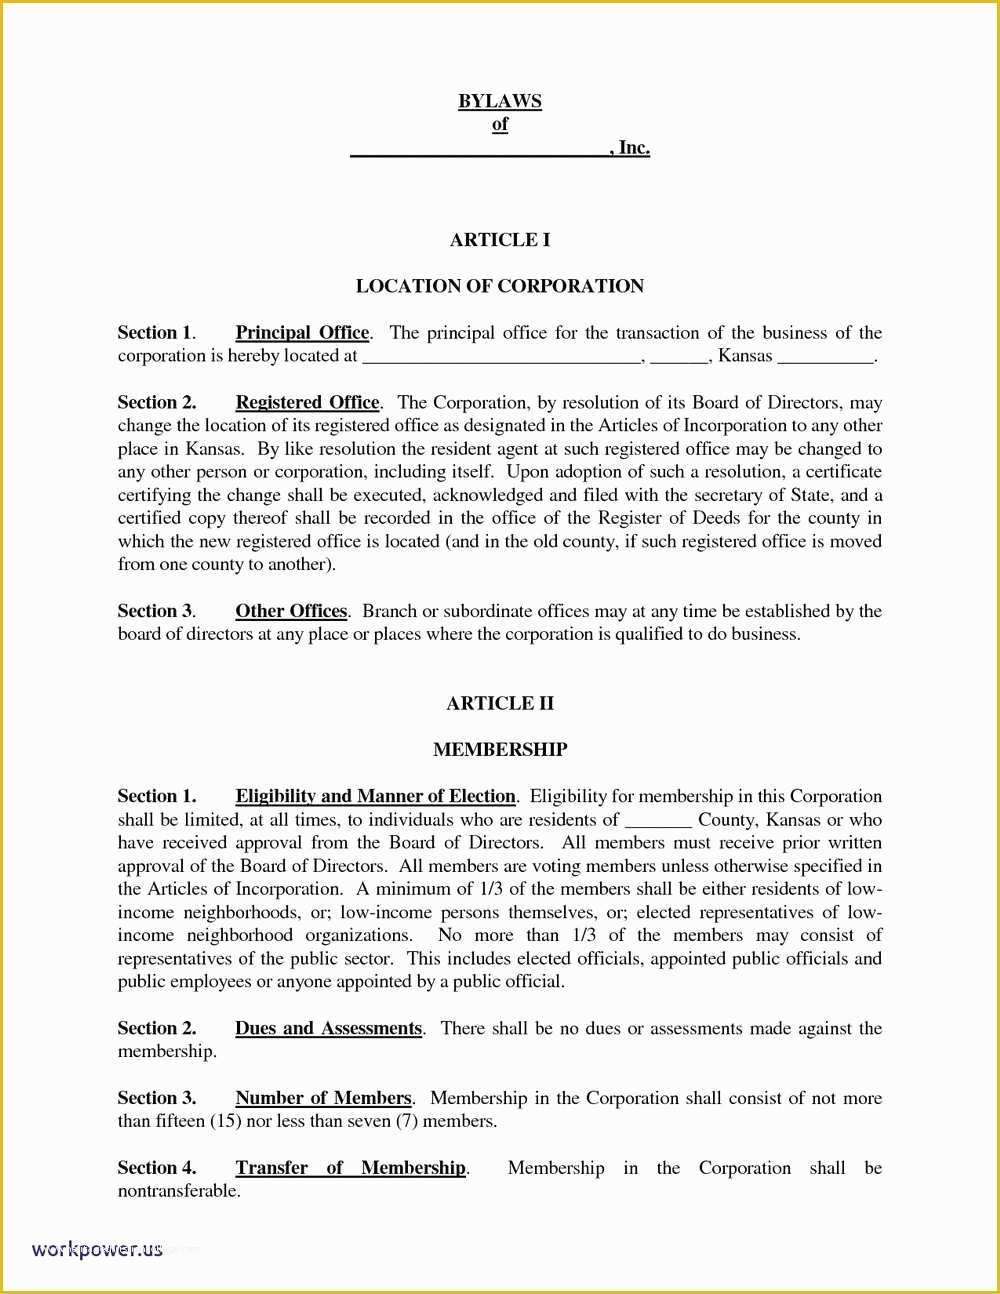 Company bylaws Template Free Of forming A Nonprofit Corporation In California forms